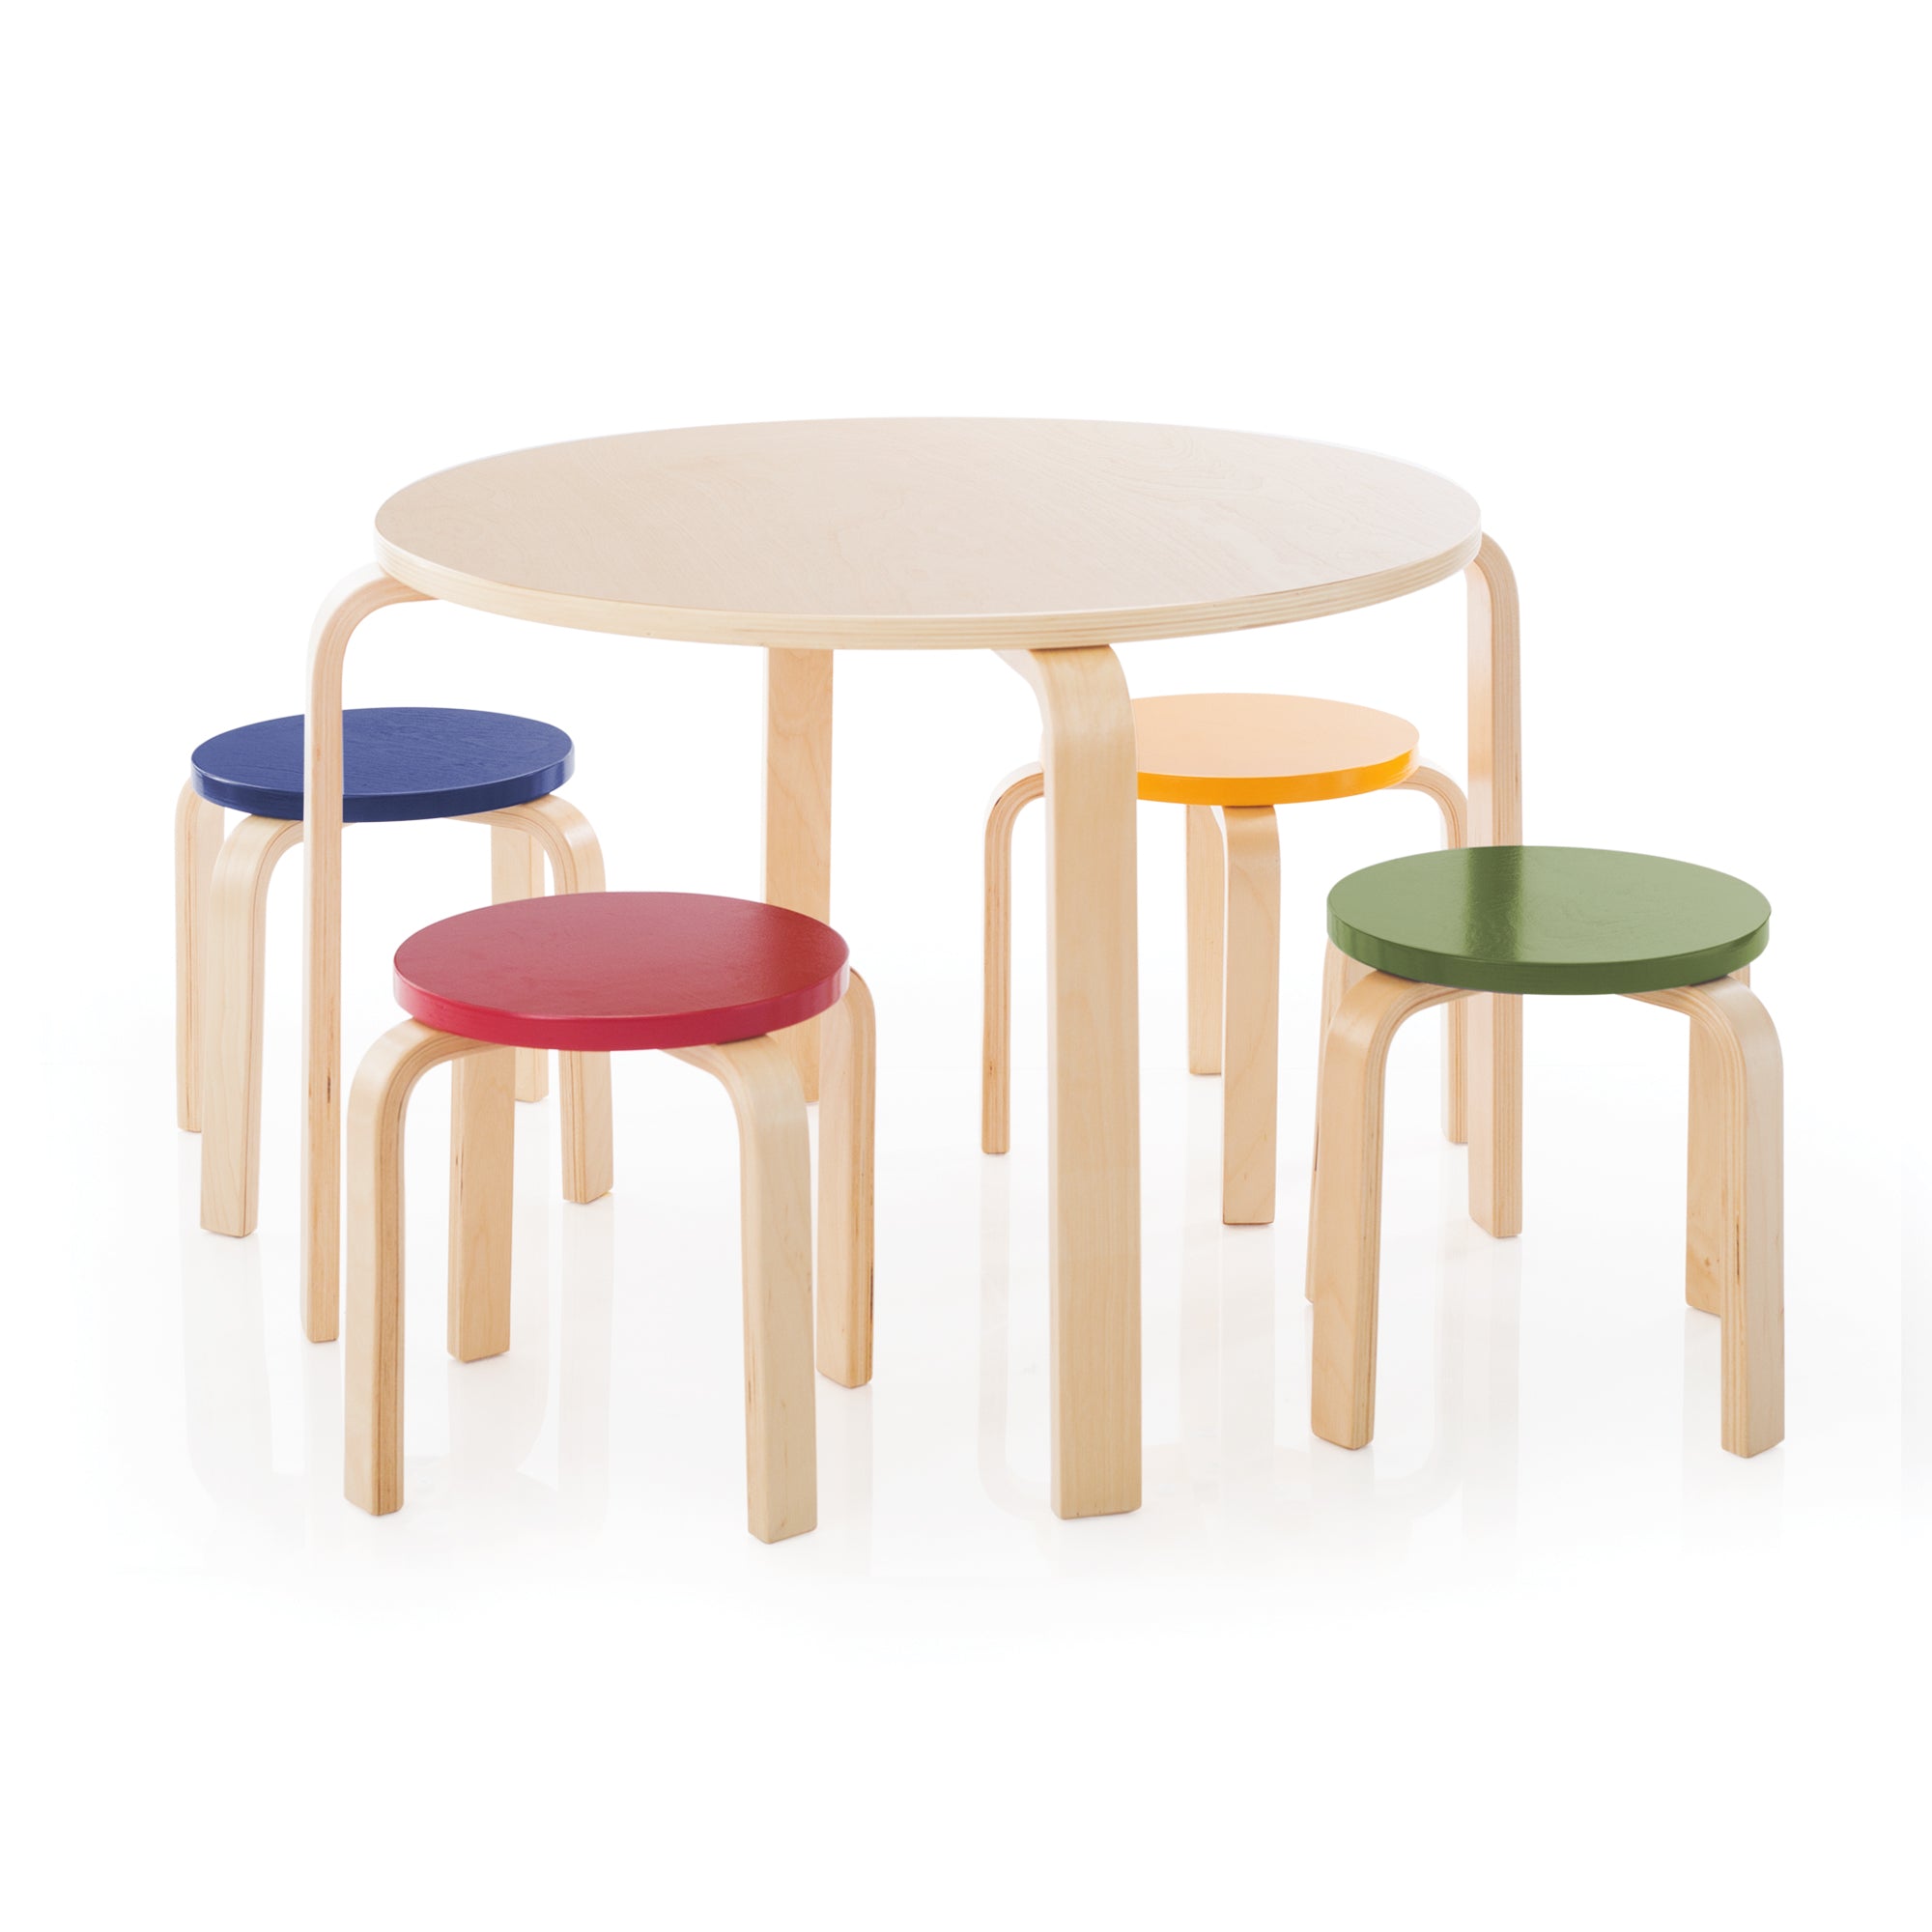 Guidecraft Nordic Table & Chairs Set